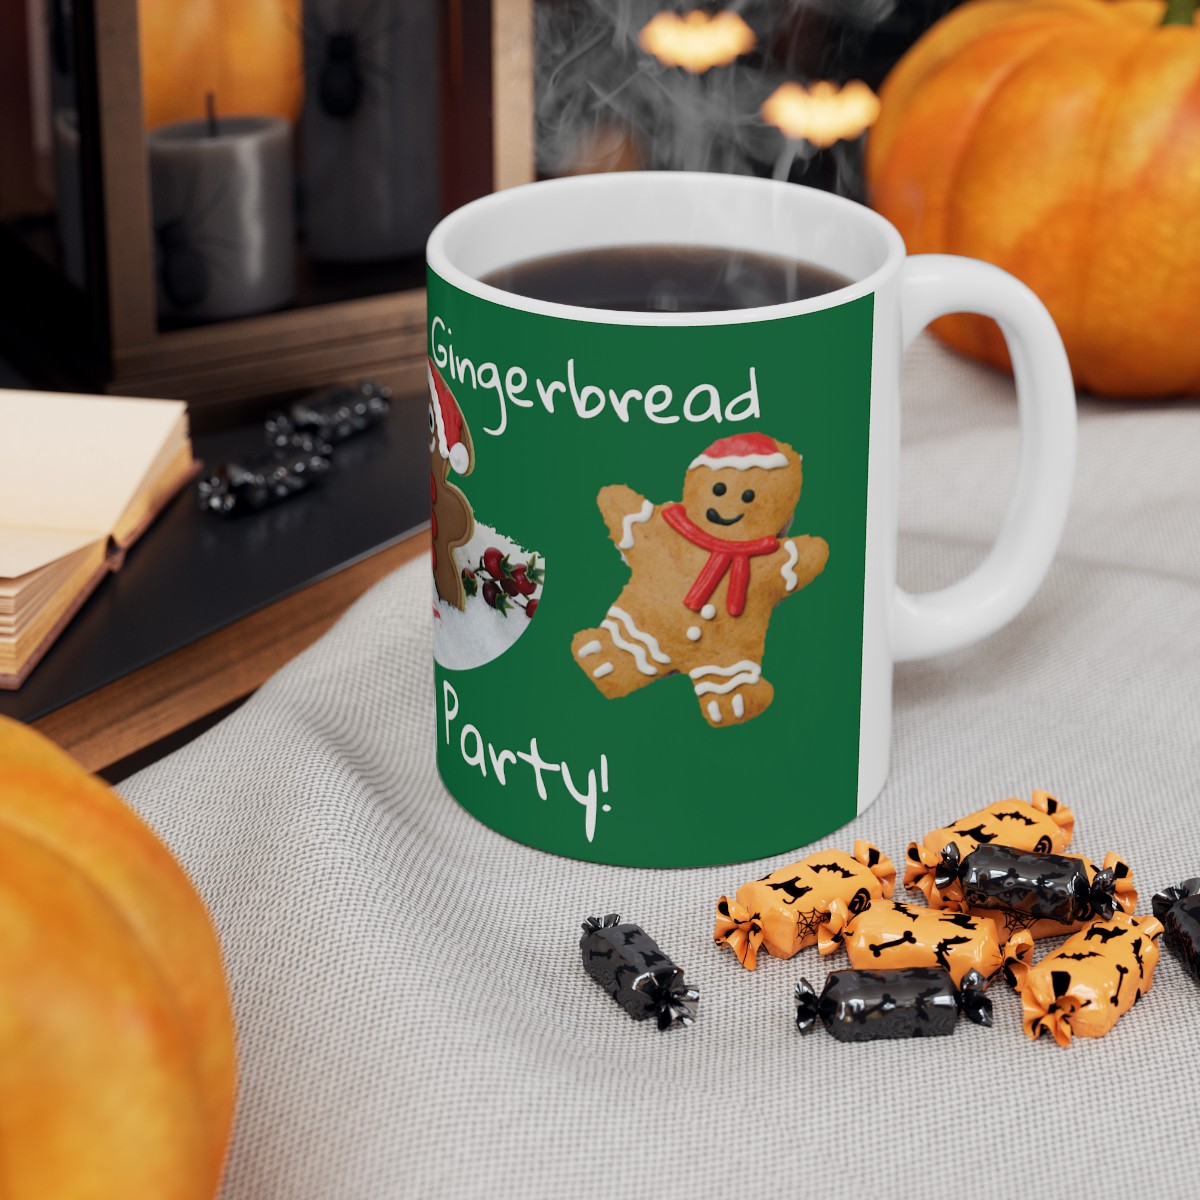 Welcome to the Gingerbread Genealogy Party! - Ceramic Mug 11oz product thumbnail image